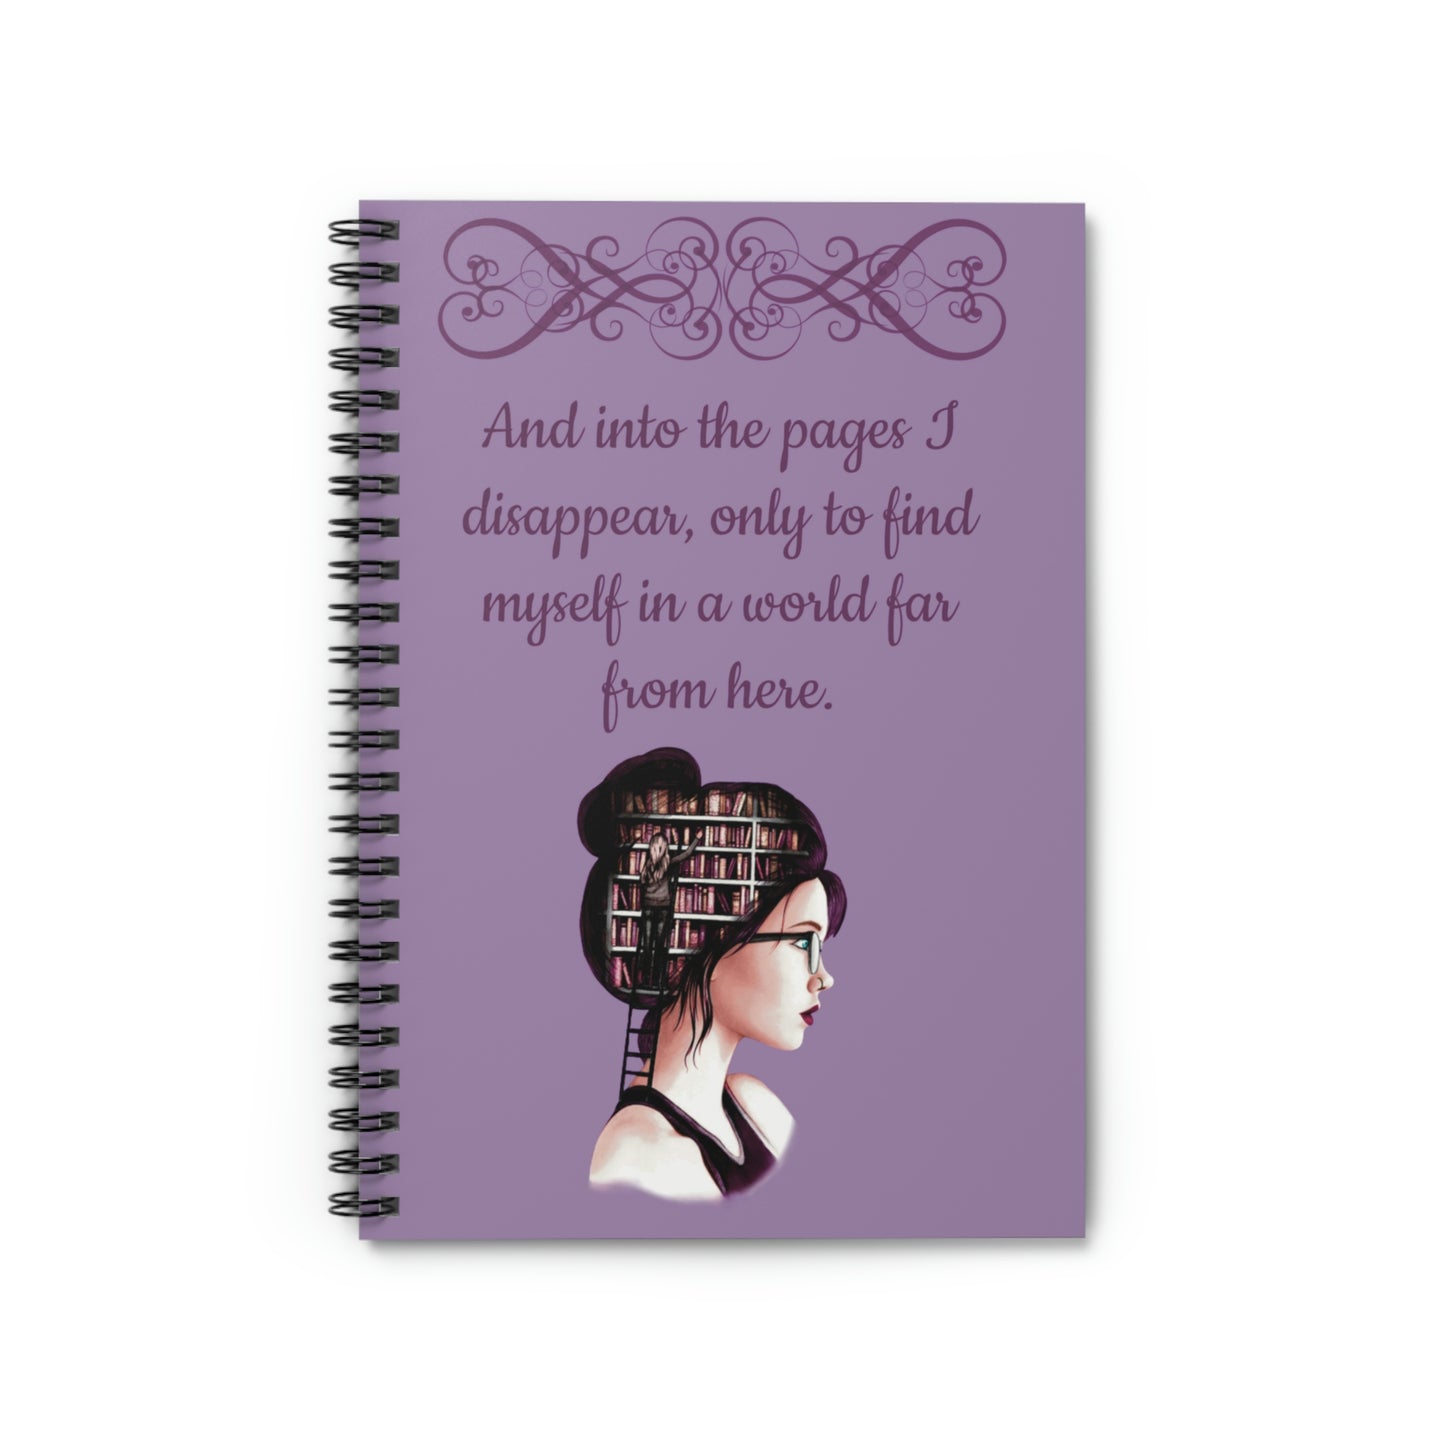 Disappear into the pages Spiral Notebook